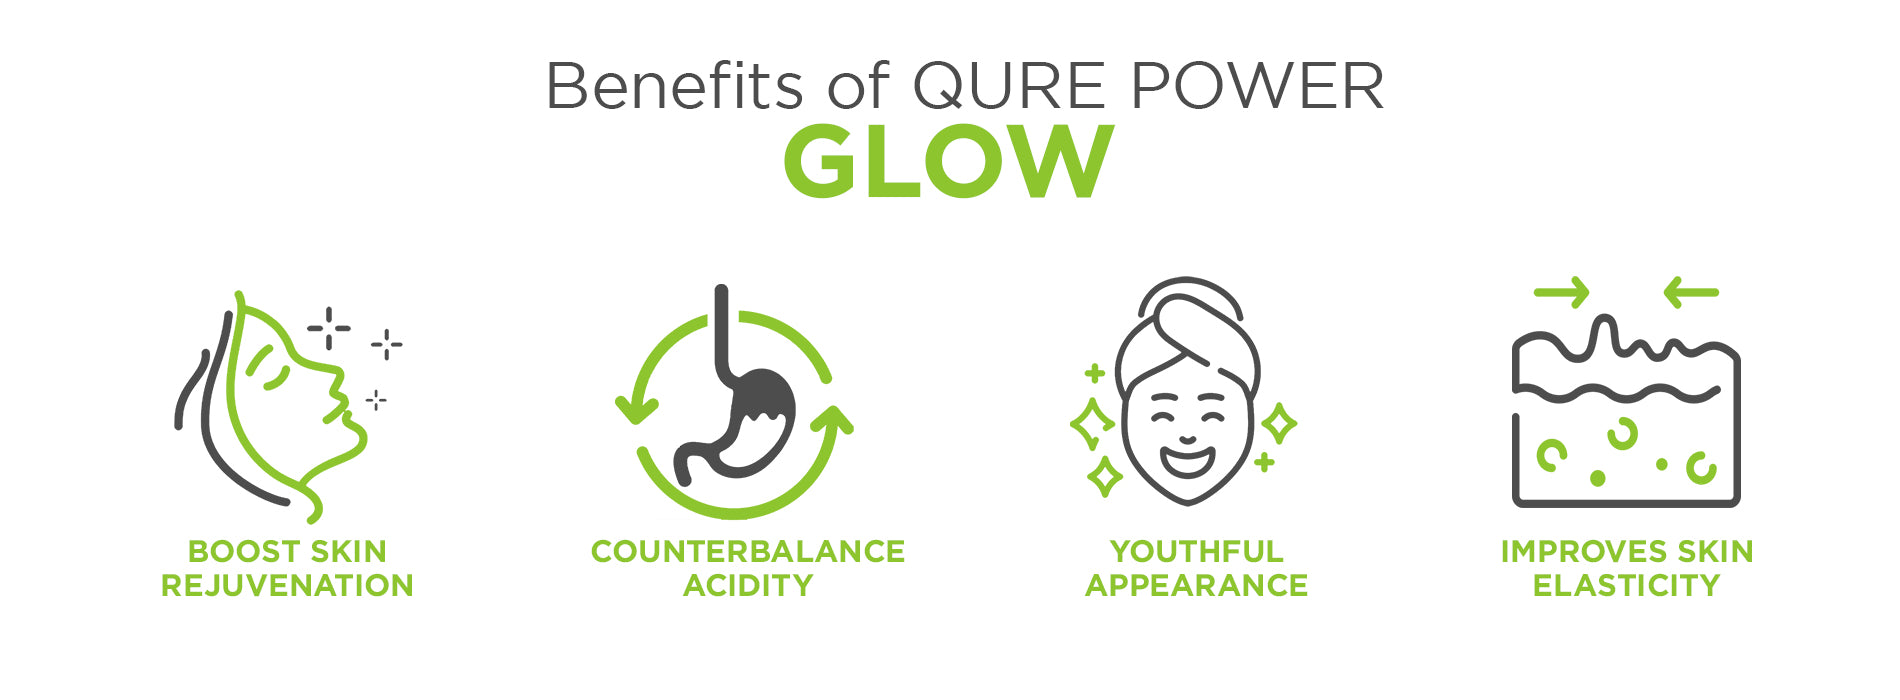 Benefits of qure power glow